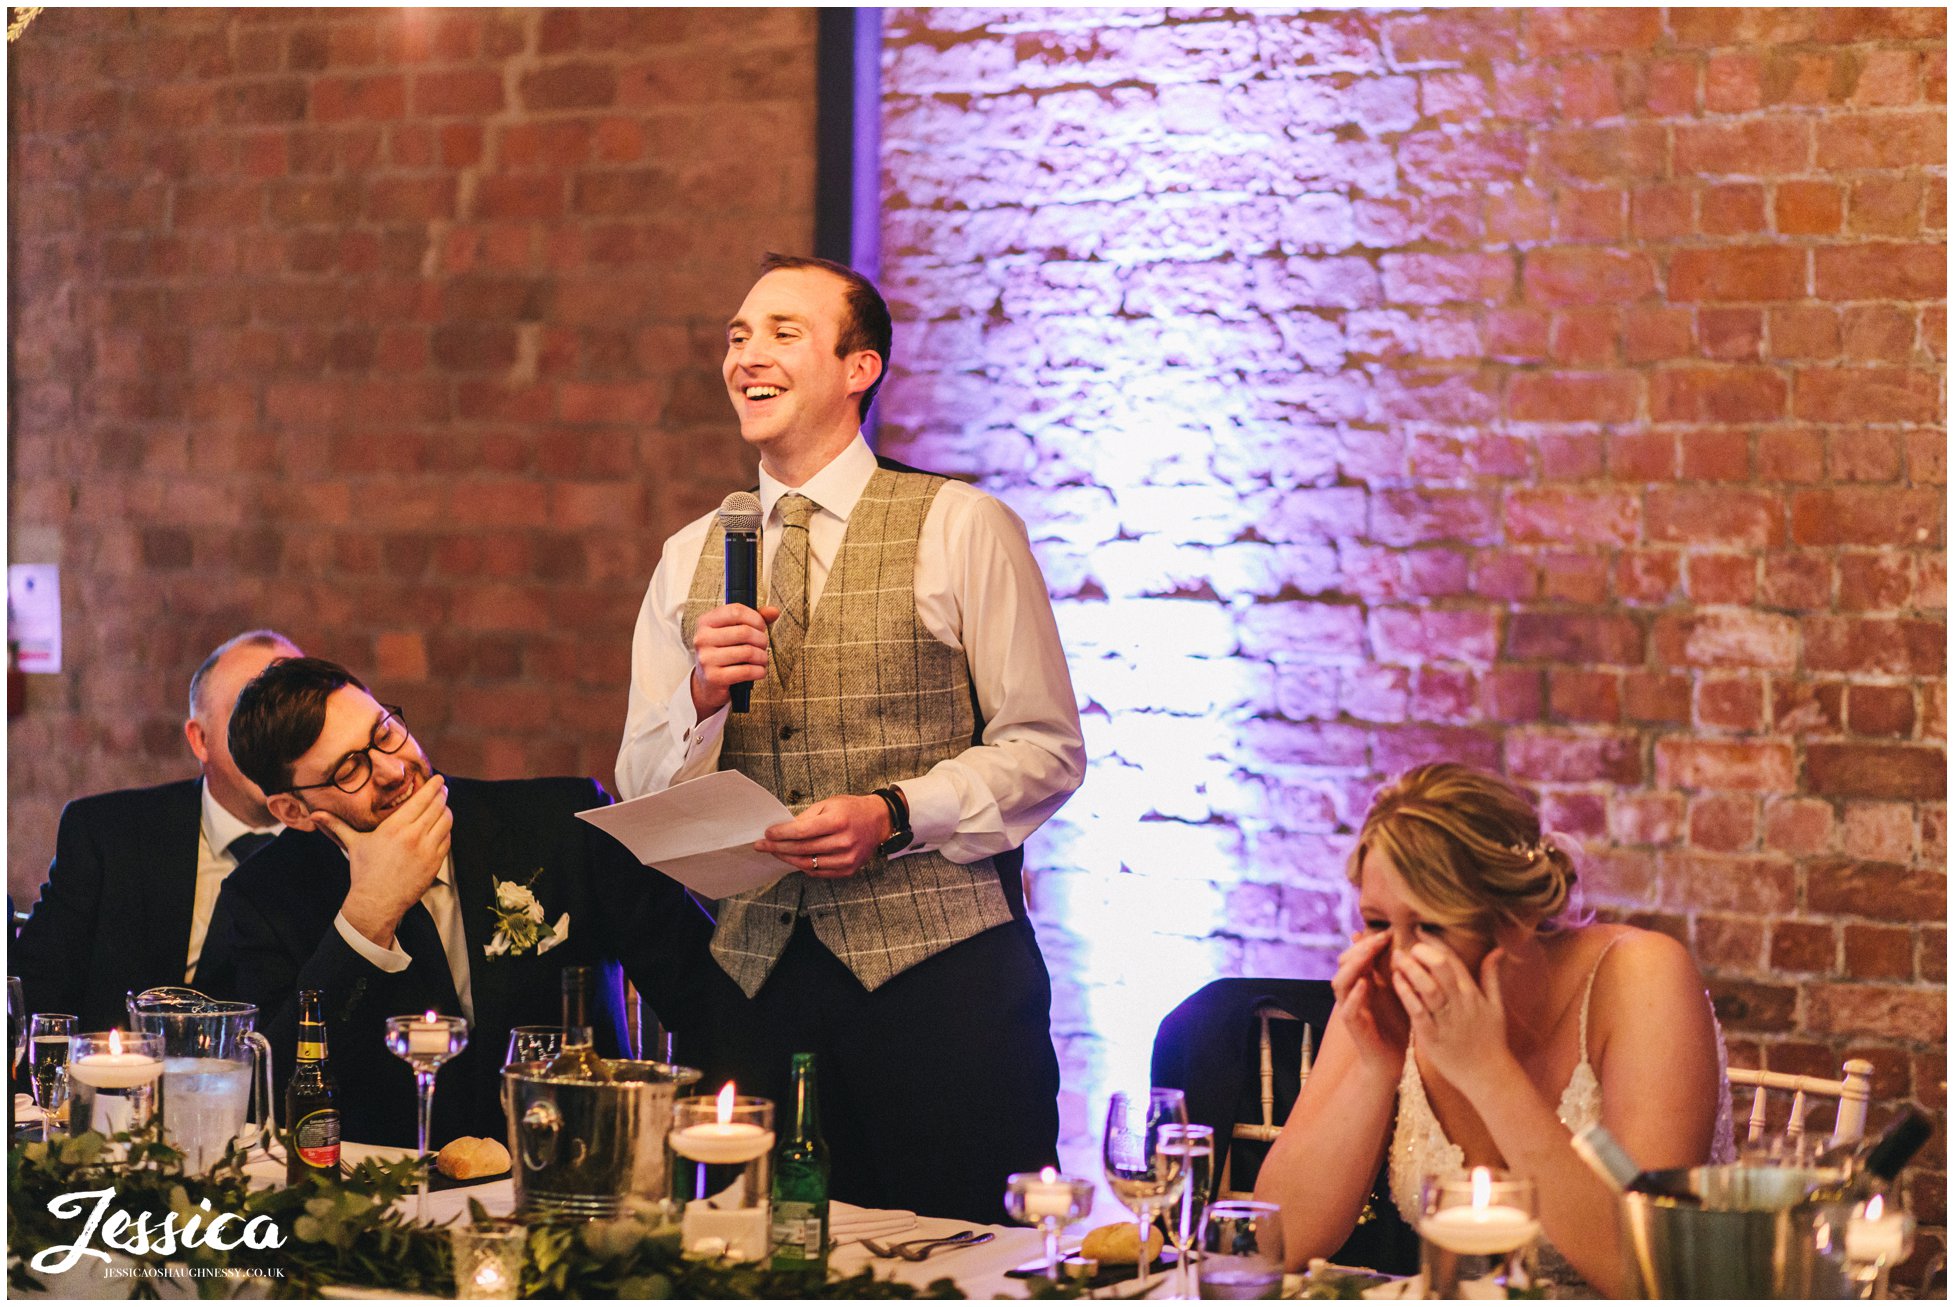 the groom stands to give his speech